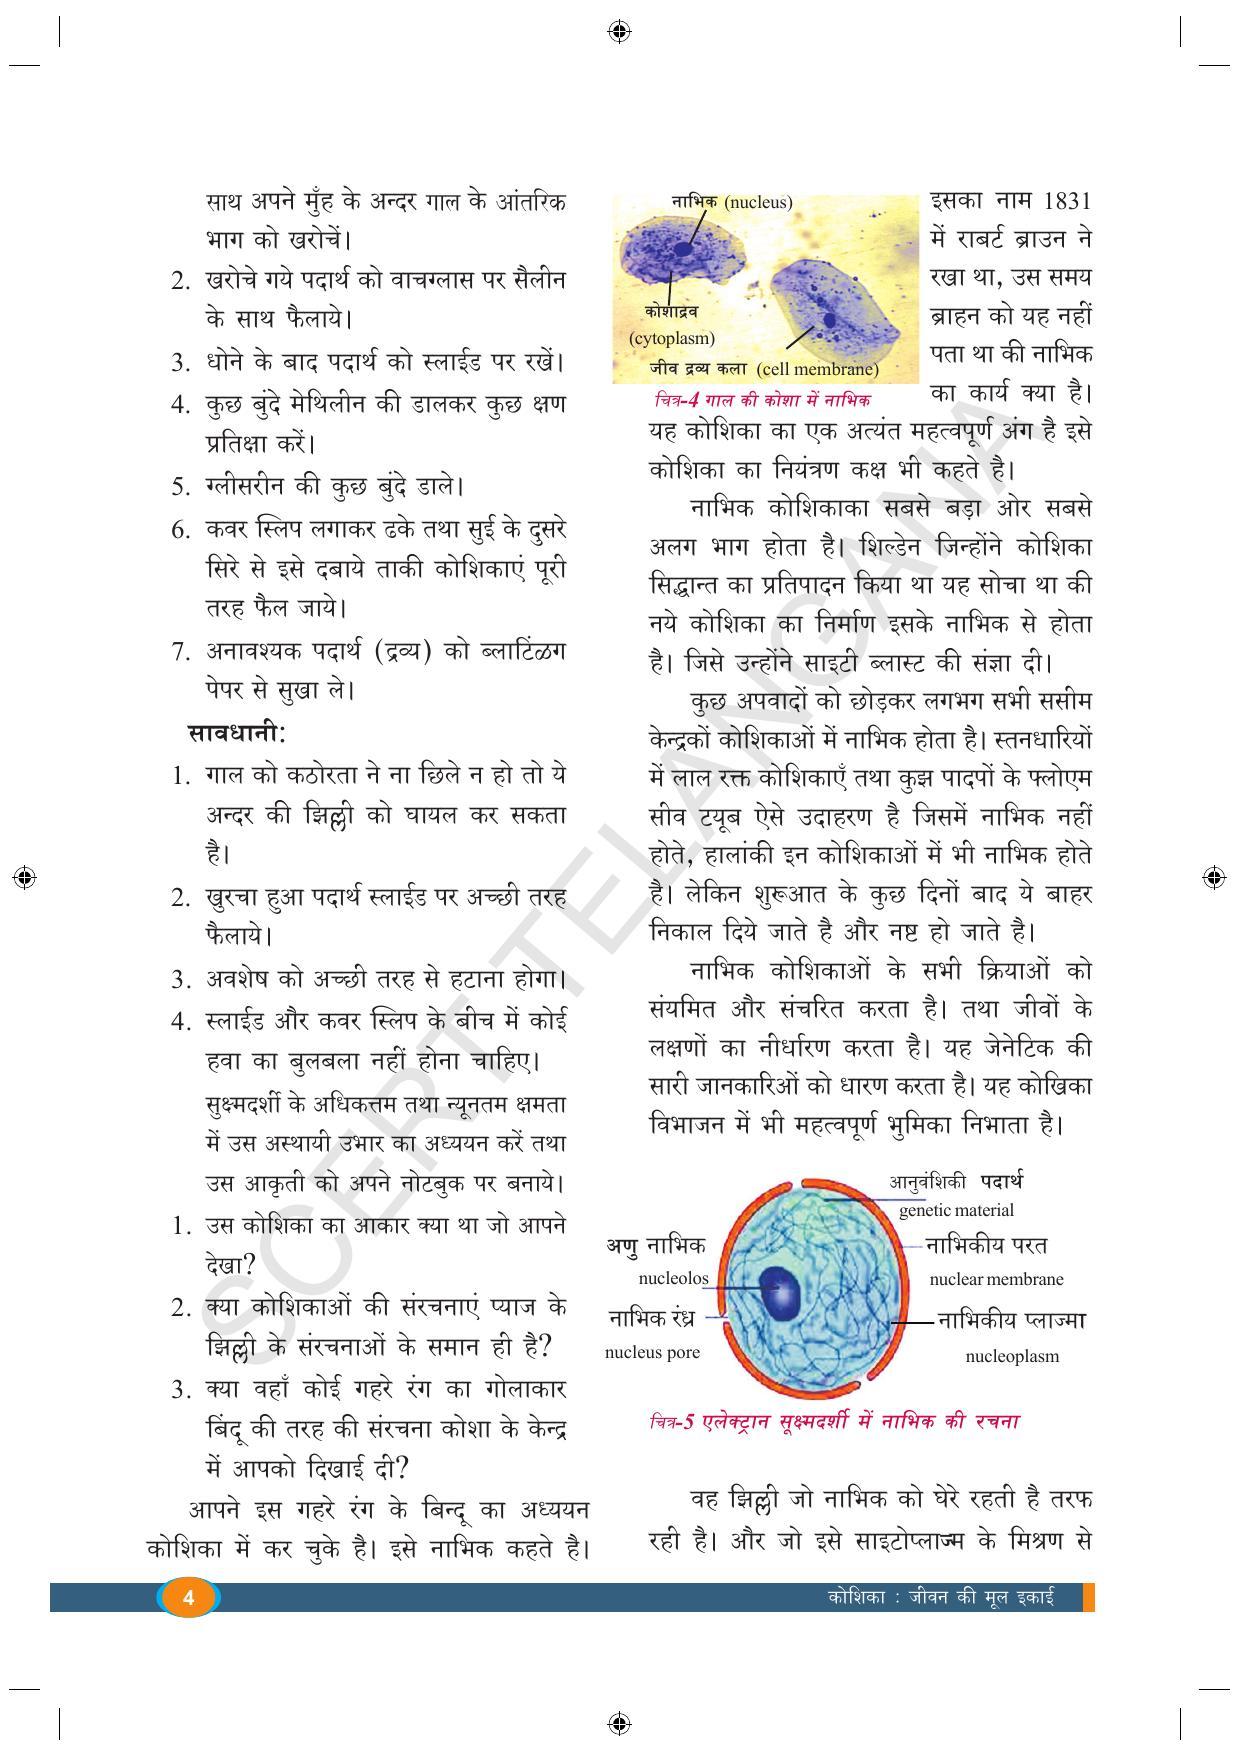 TS SCERT Class 9 Biological Science (Hindi Medium) Text Book - Page 16